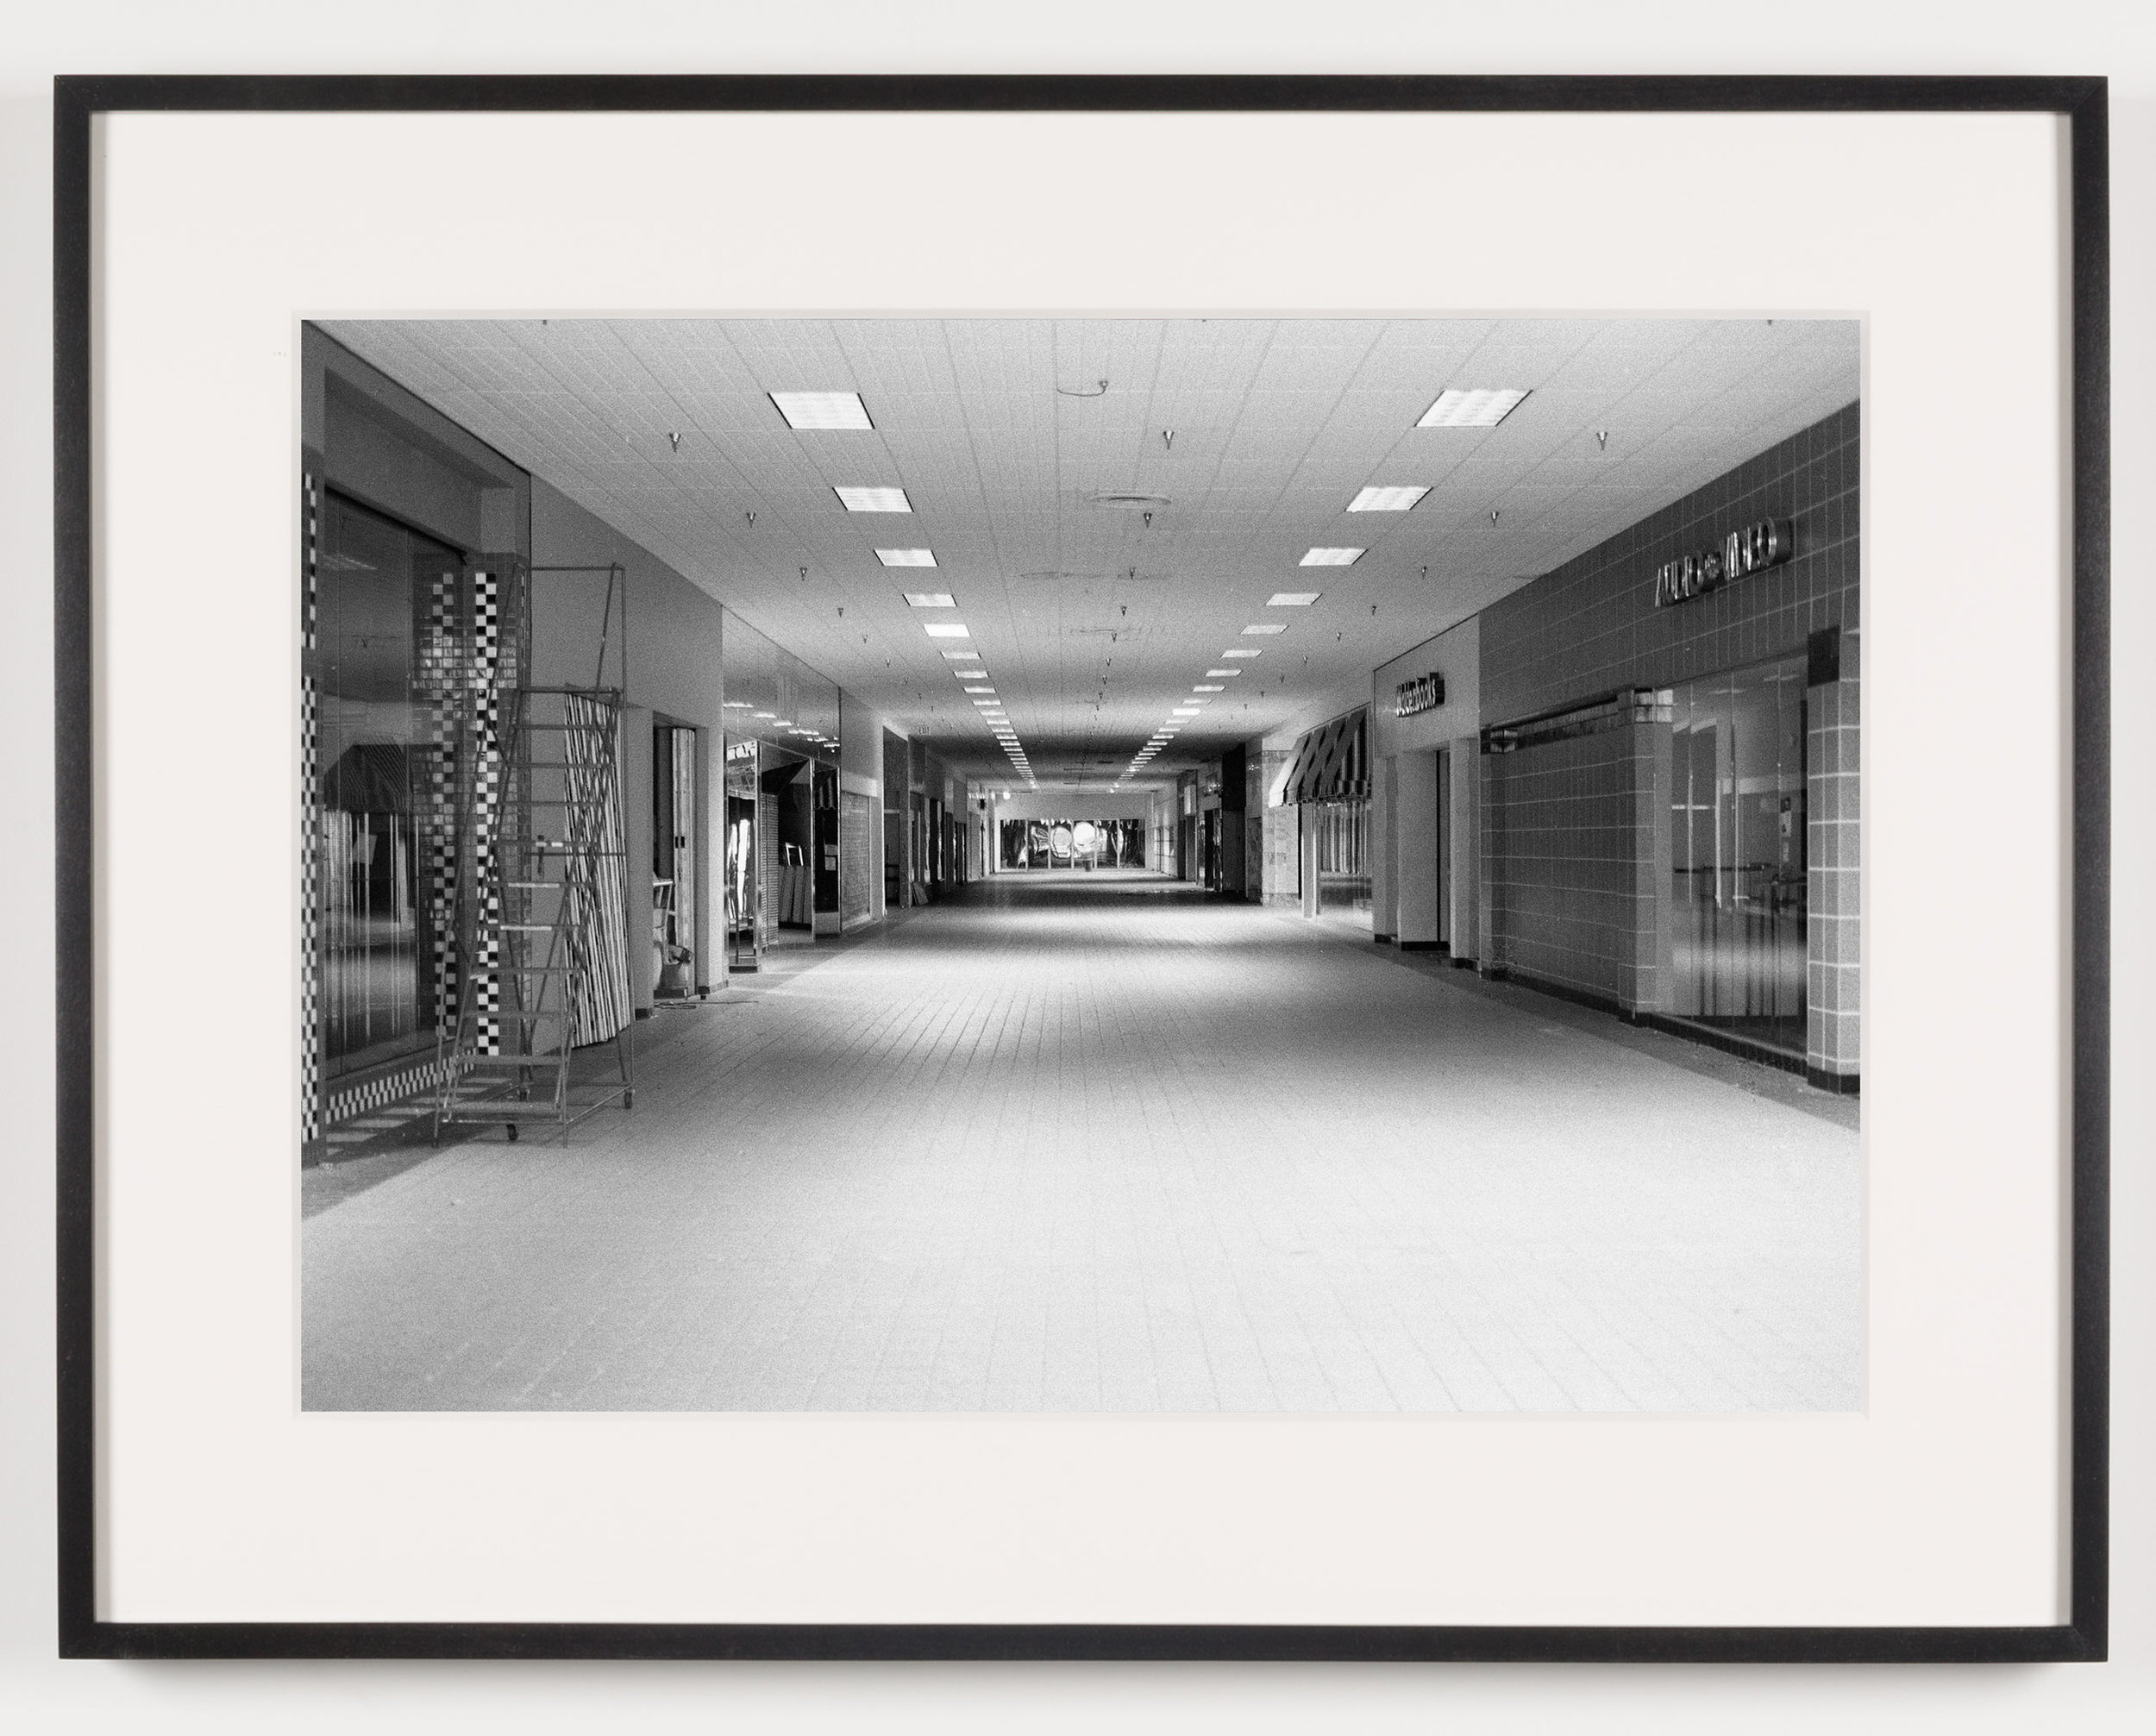   Lockport Mall (View of Interior), Lockport, NY, Est. 1971, Demo. 2011   2011  Epson Ultrachrome K3 archival ink jet print on Hahnemühle Photo Rag paper  21 5/8 x 28 1/8 inches   American Passages, 2001–2011    A Diagram of Forces, 2011     